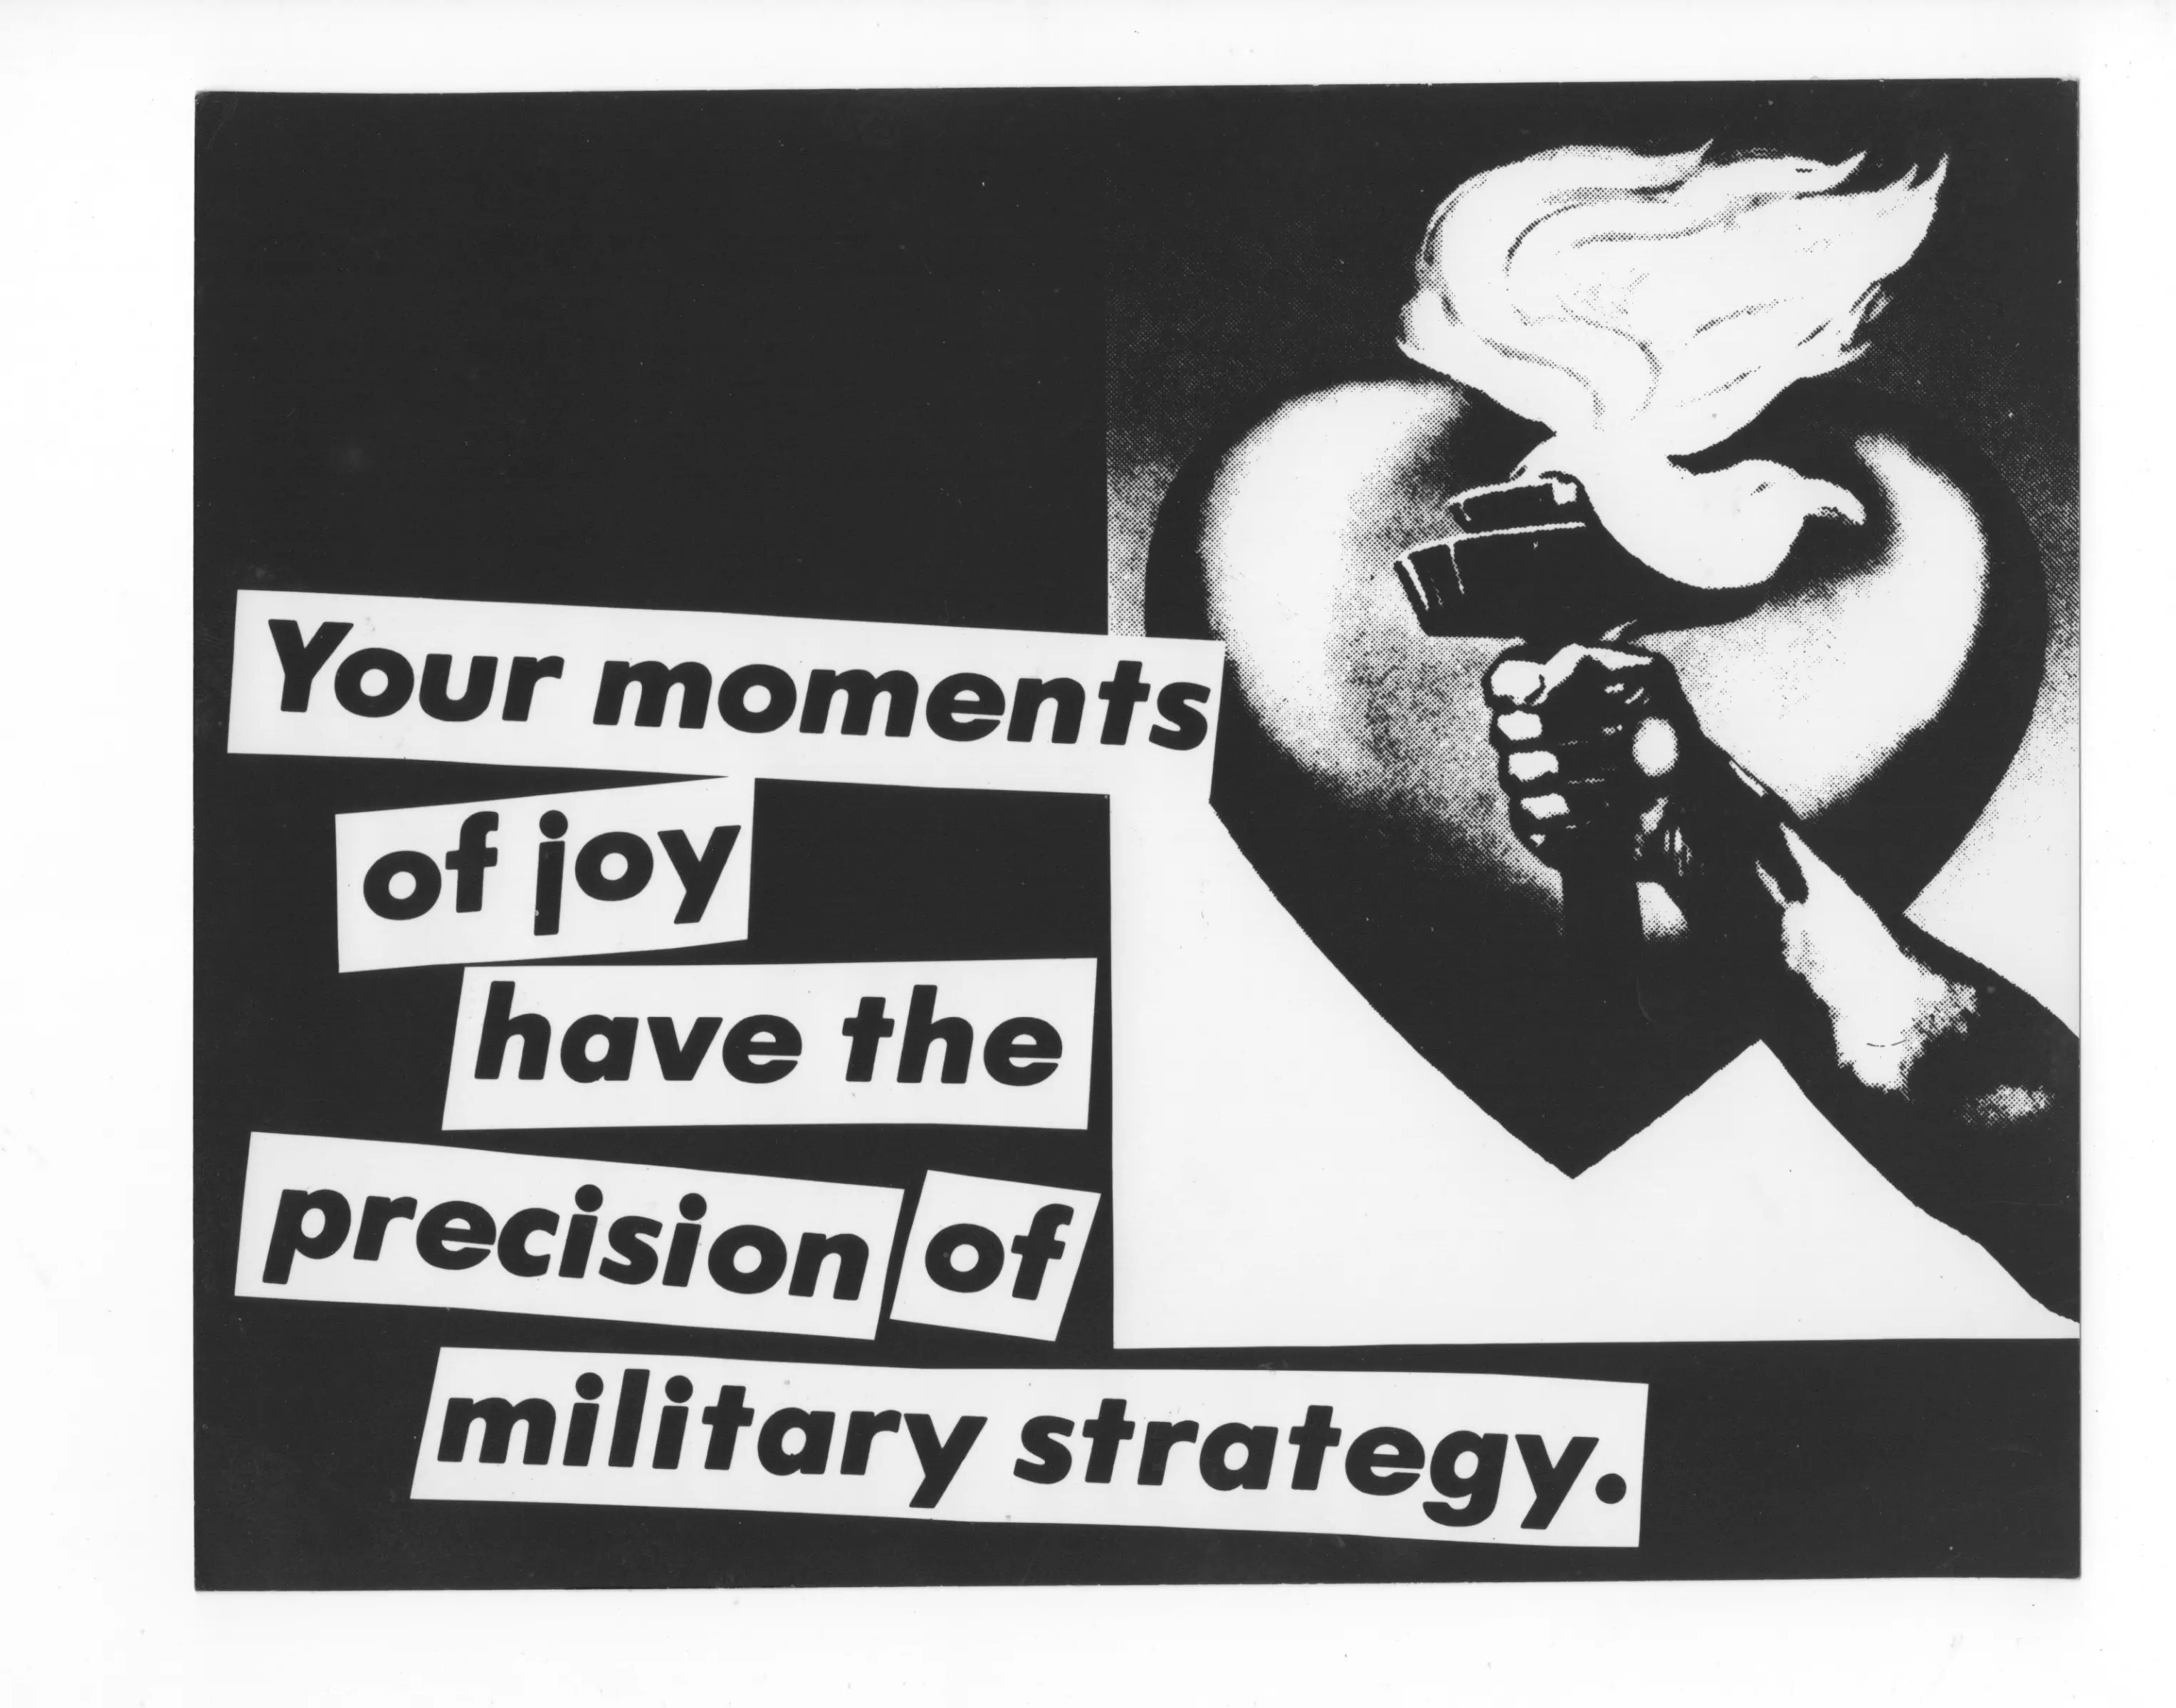 Barbara Kruger, Untitled (Your moments of joy have the precision of military strategy.), 1980. Collection of Liz and Eric Lefkofsky. Zdroj: mcachicago.org.